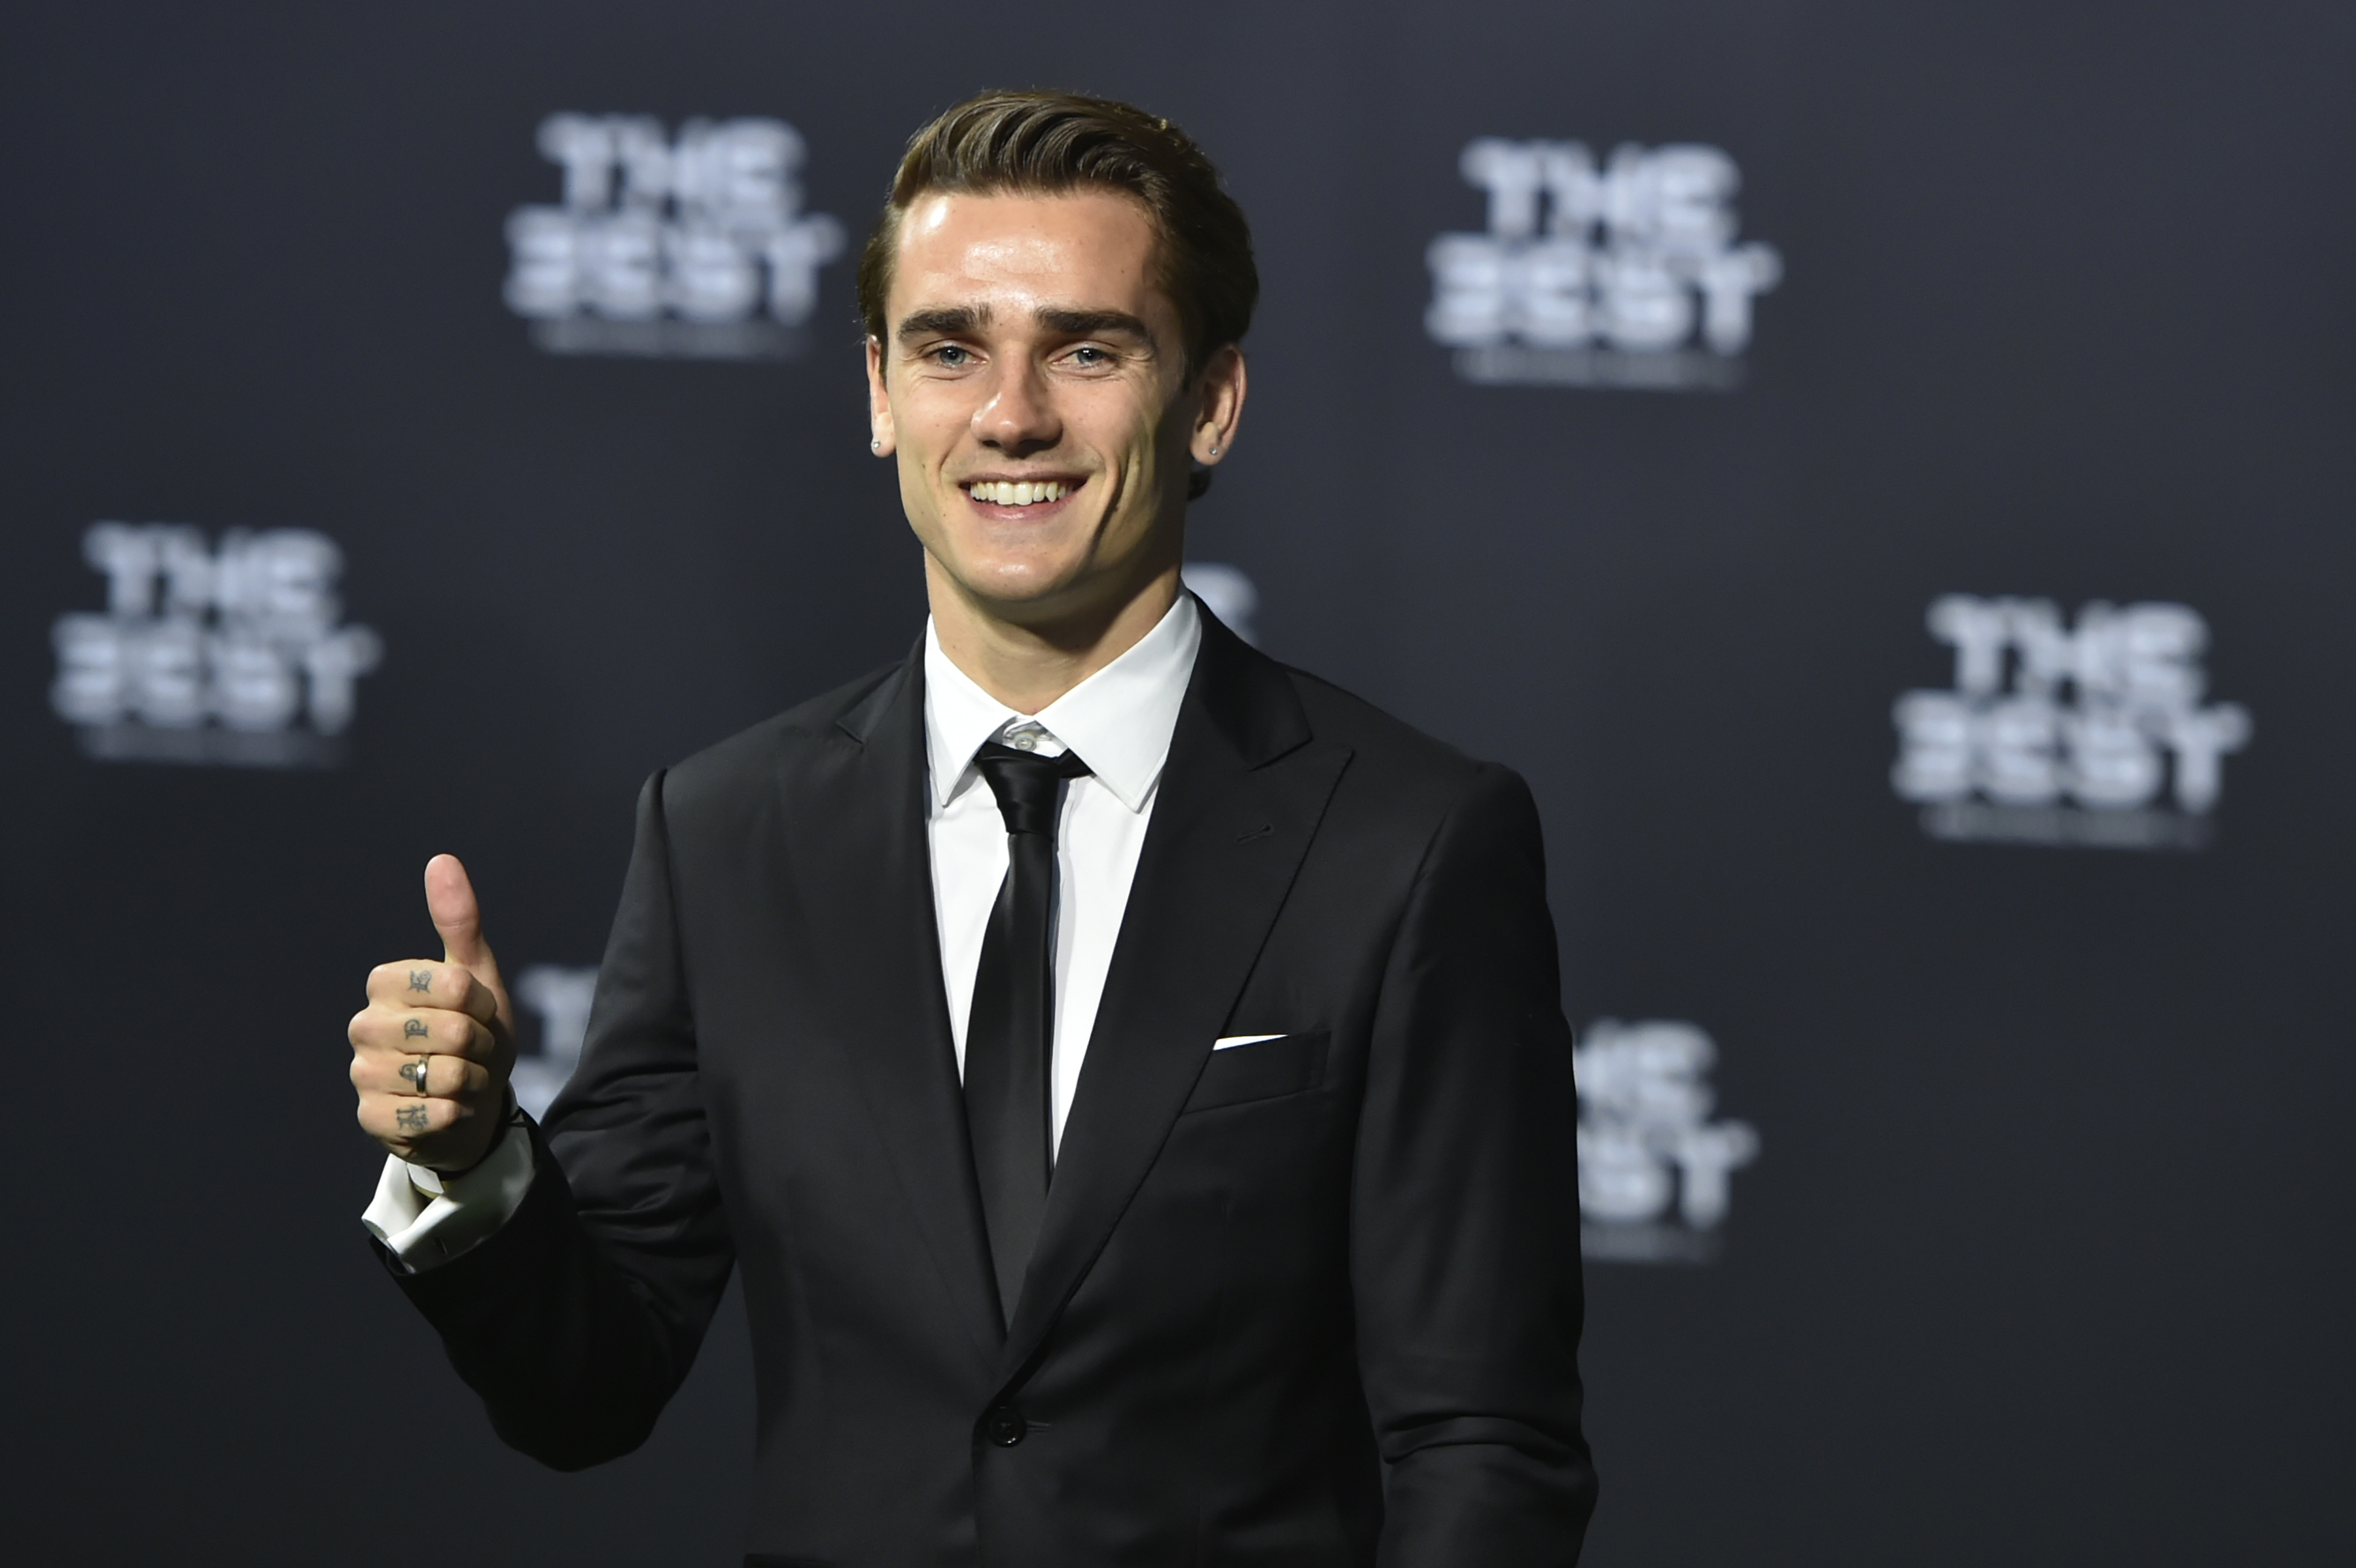 Atletico Madrid and France's forward Antoine Griezmann poses as he arrives for The Best FIFA Football Awards 2016 ceremony, on January 9, 2017 in Zurich. / AFP / MICHAEL BUHOLZER        (Photo credit should read MICHAEL BUHOLZER/AFP/Getty Images)